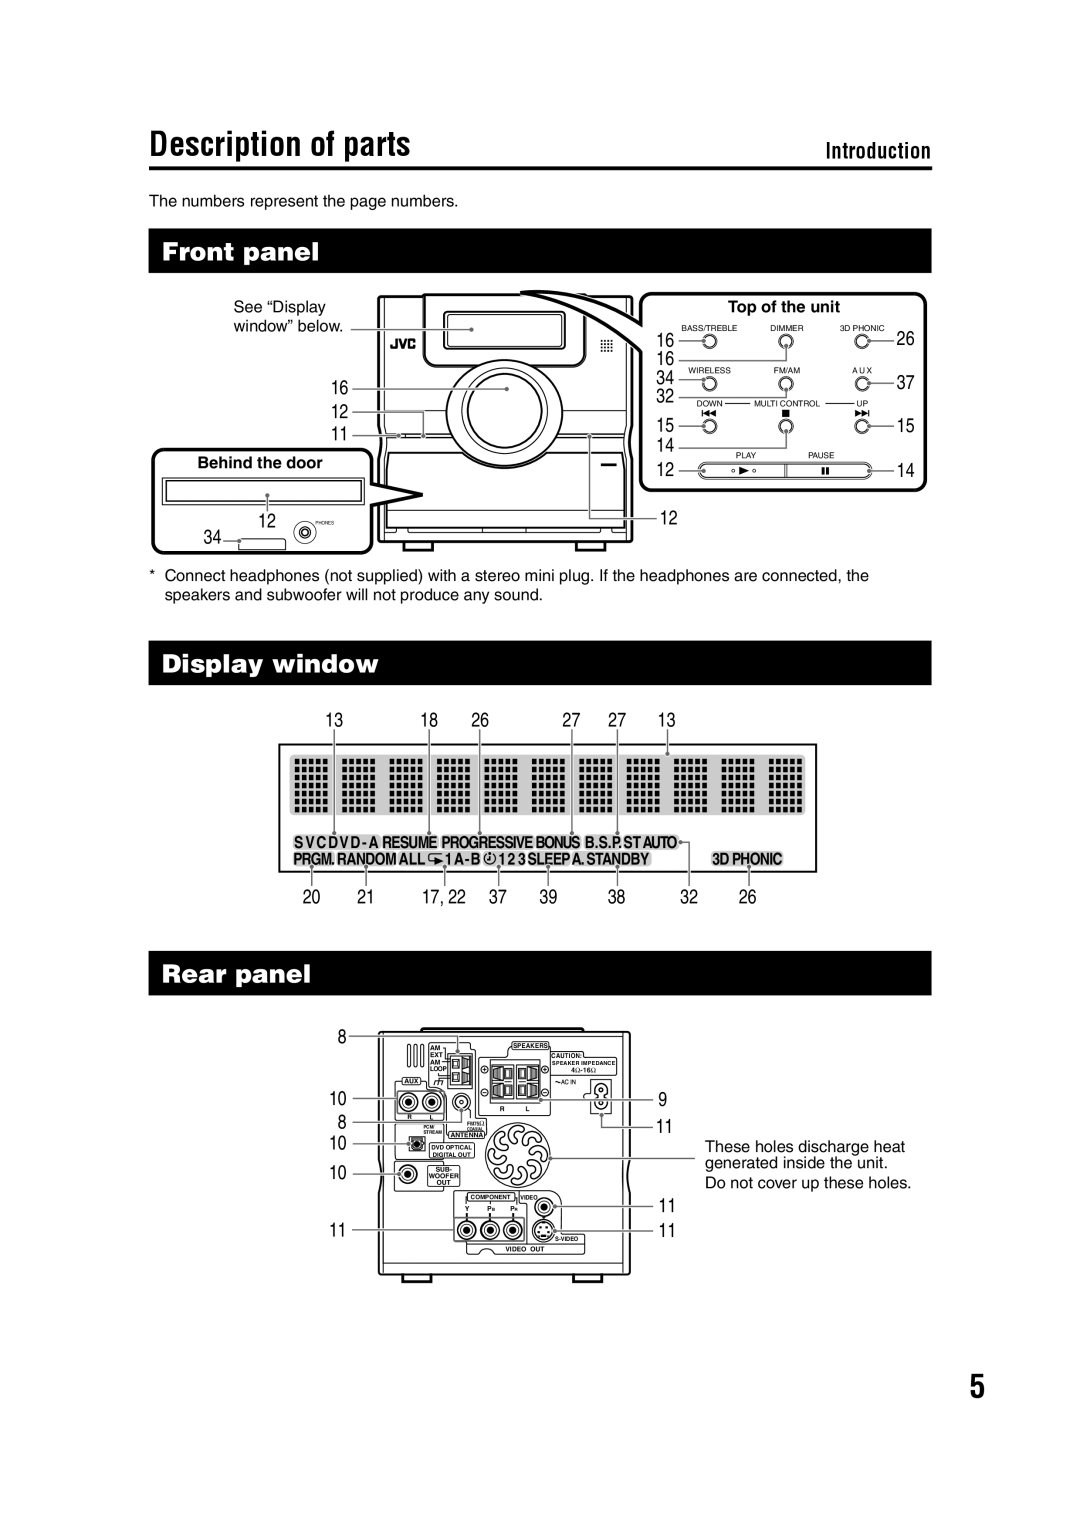 JVC GVT0144-005A manual Description of parts, Front panel, Display window, Rear panel, Introduction 